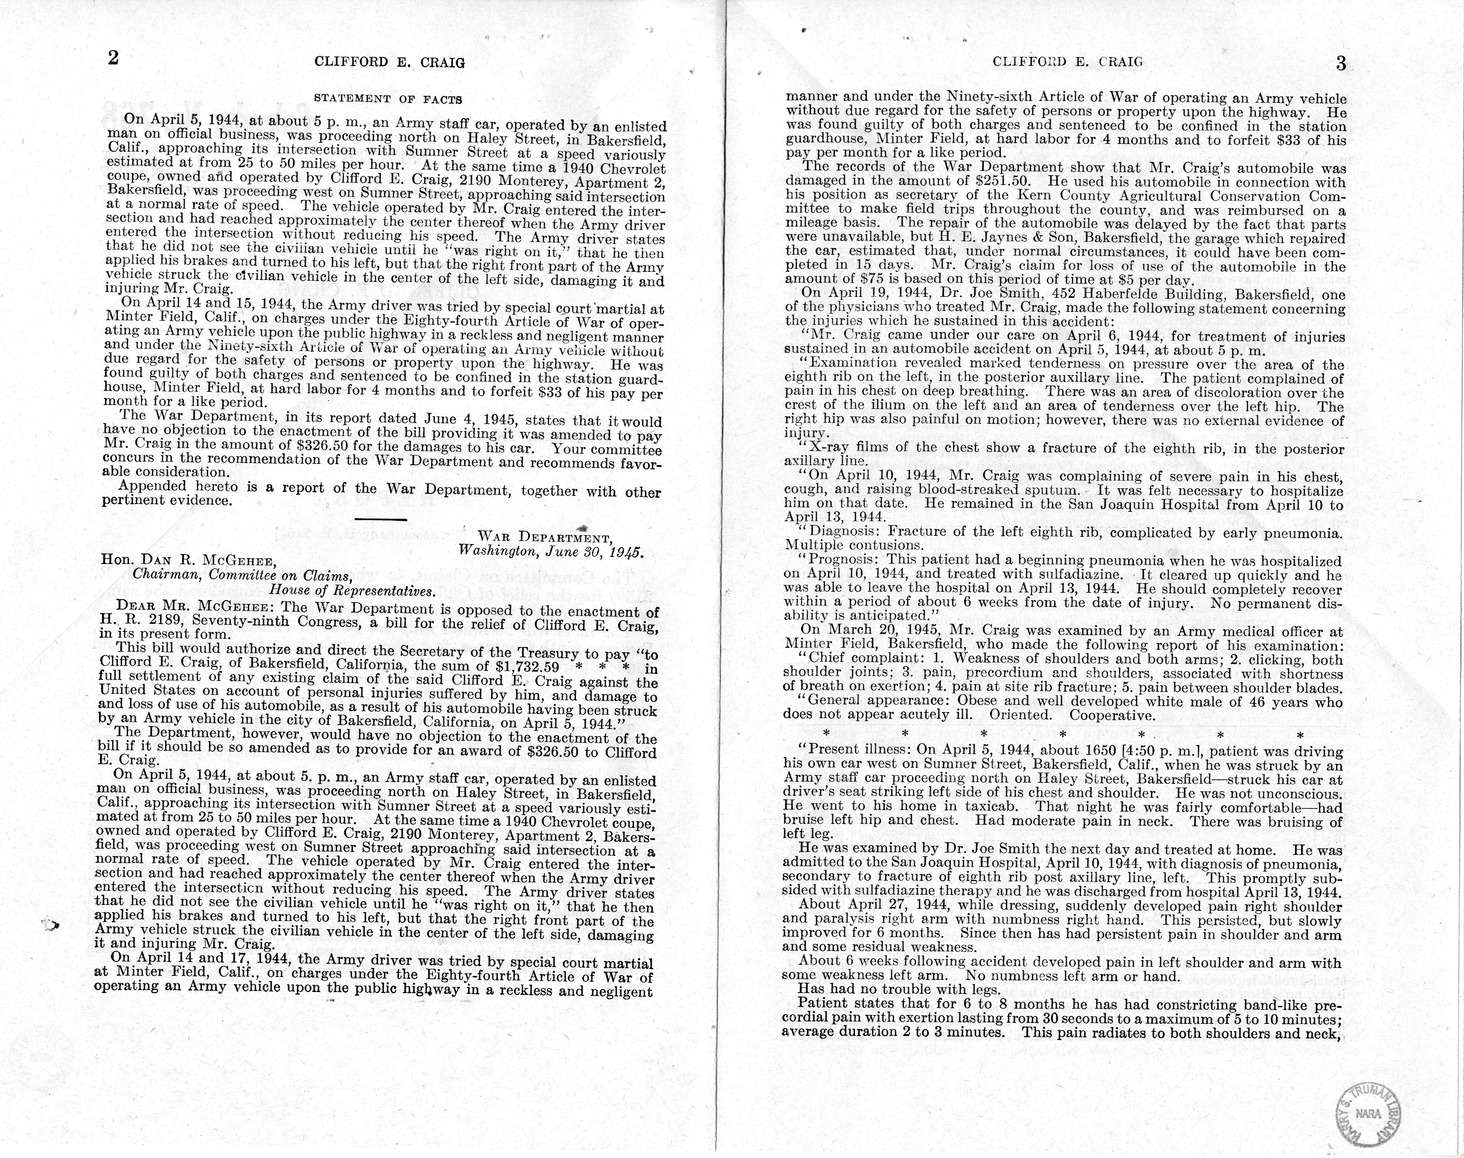 Memorandum from Frederick J. Bailey to M. C. Latta, H.R. 2189, For the Relief of Clifford E. Craig, with Attachments